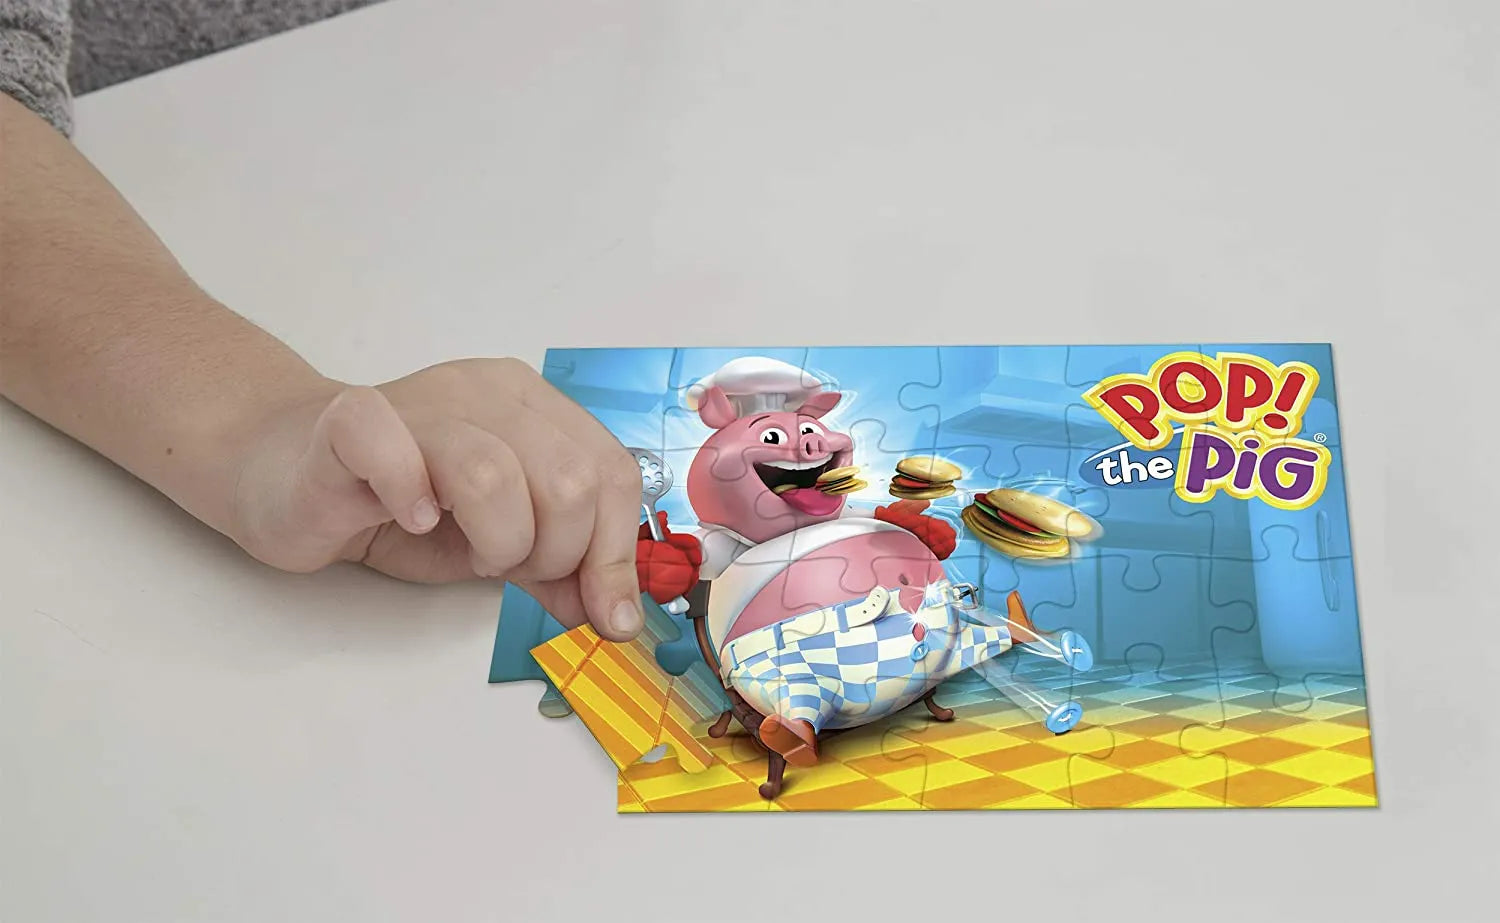 Puzzle to develop hand eye coordination - Shop Pop the Pig (Bigger and Better) - Vivid Golaith